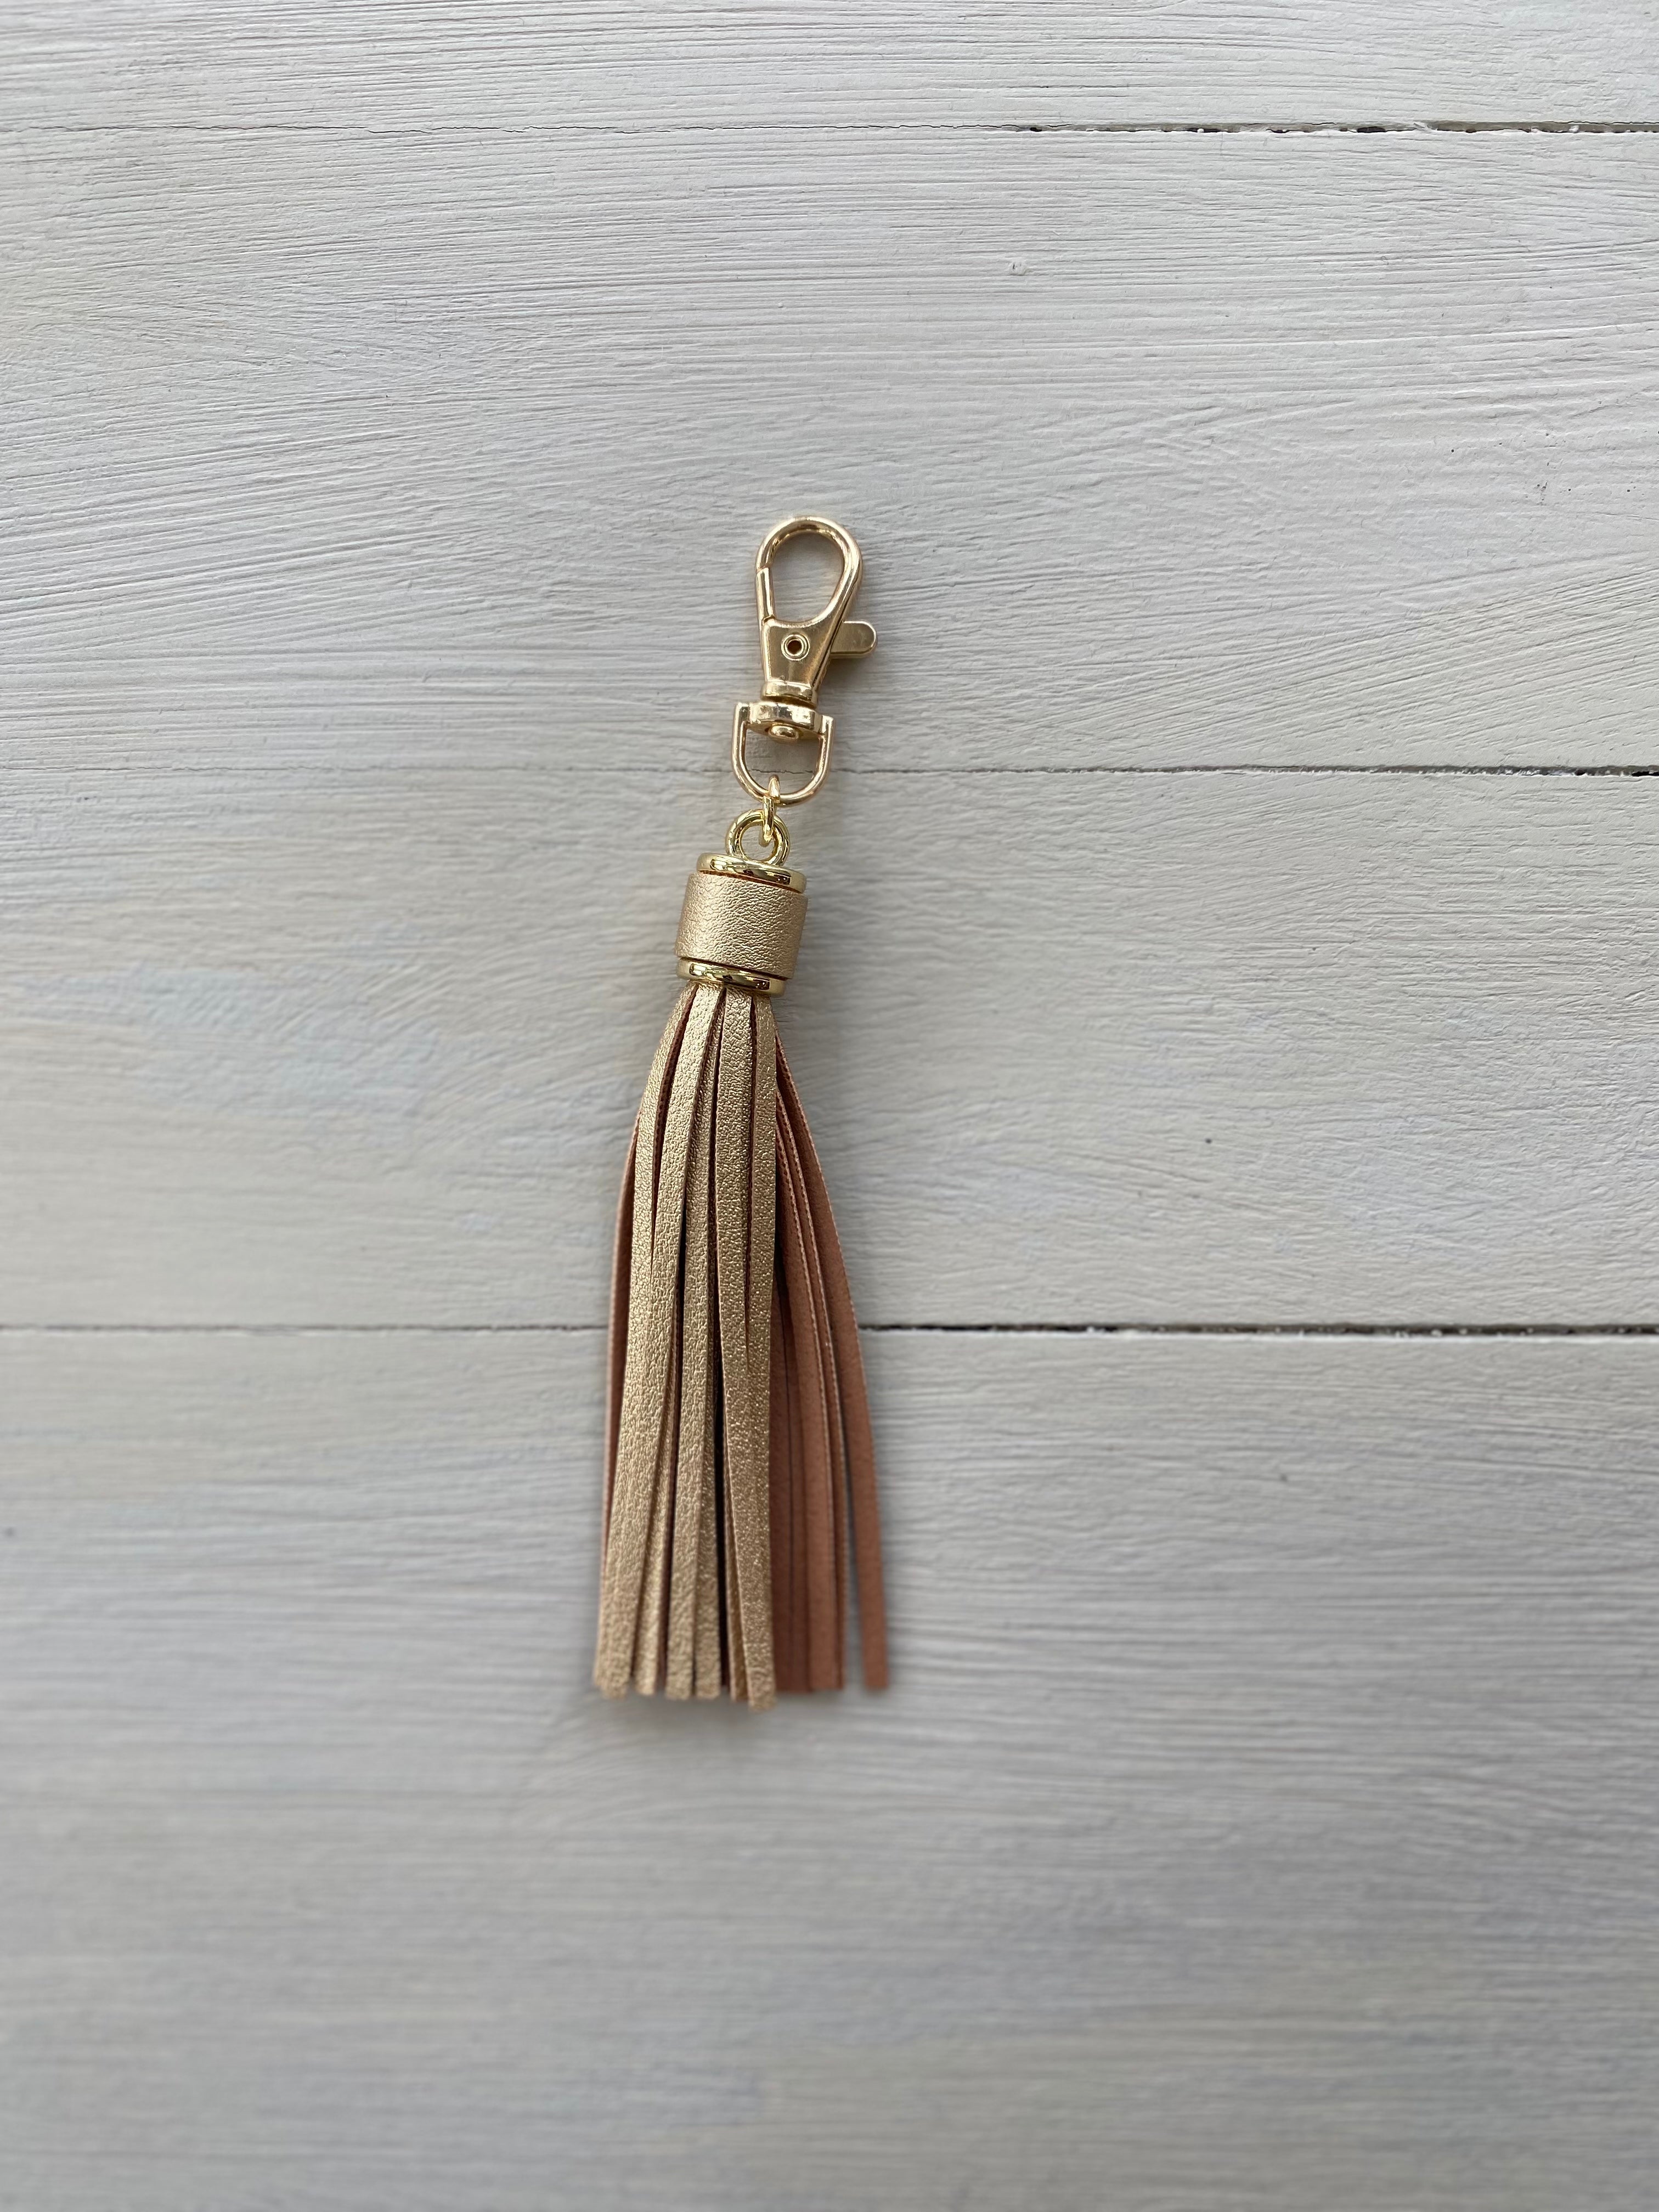 SVF Animal Print Faux Leather Tassel and Motivational Engraved Acrylic Charm of choice! (Copy) The Mustard Seed Collection, The Seed